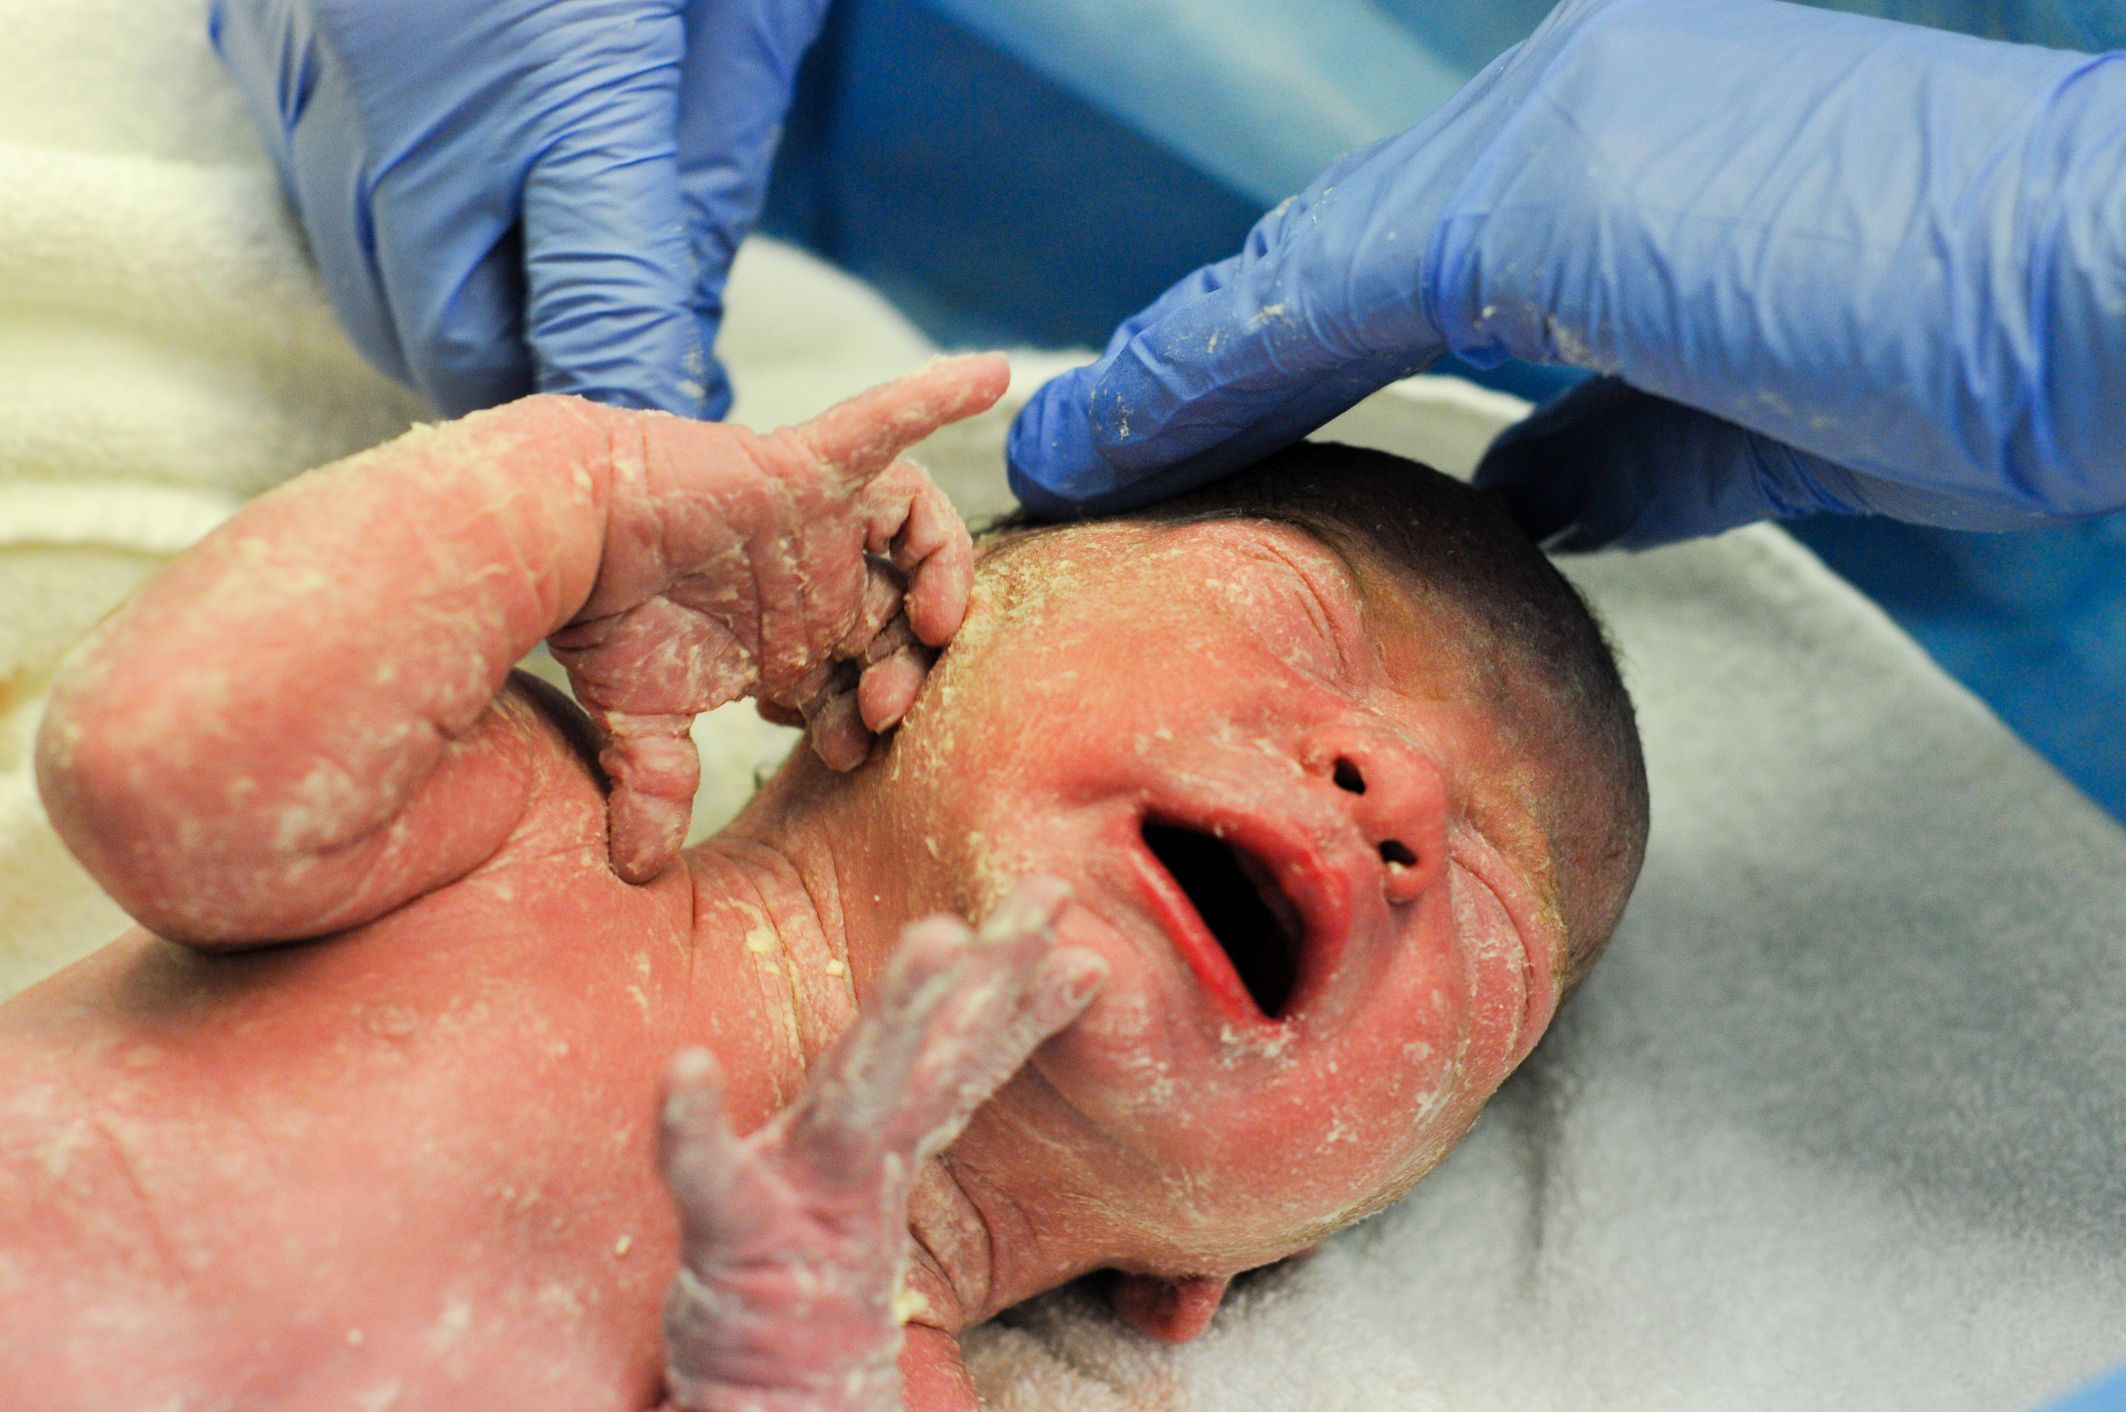 newborn care after delivery